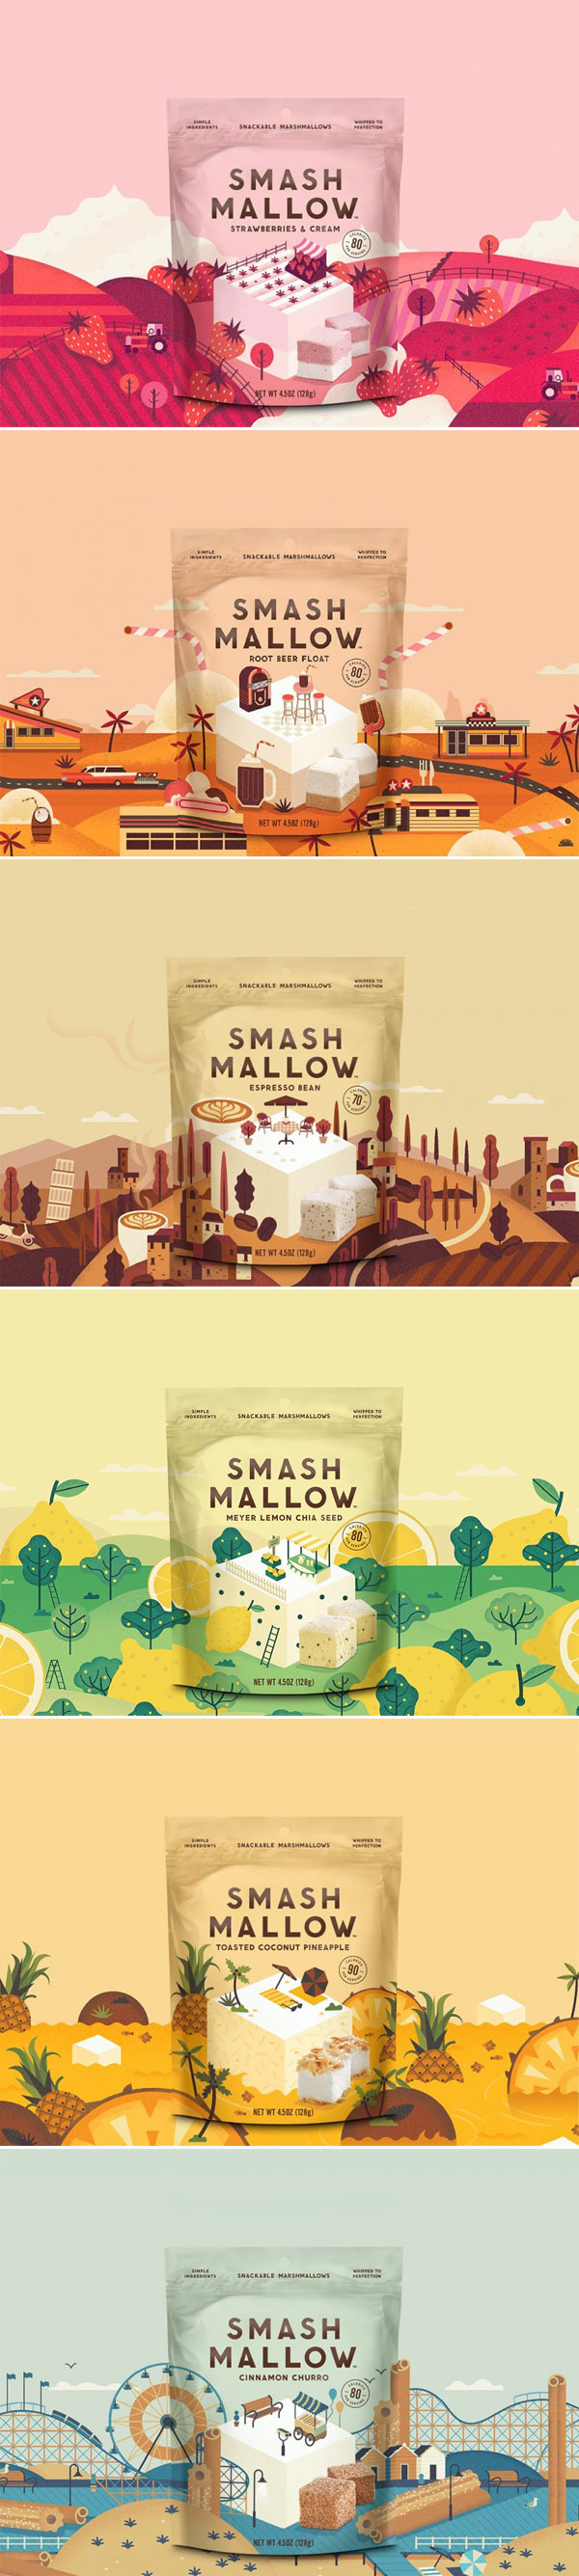 Smashmallow | branding & packaging by Hatch Design